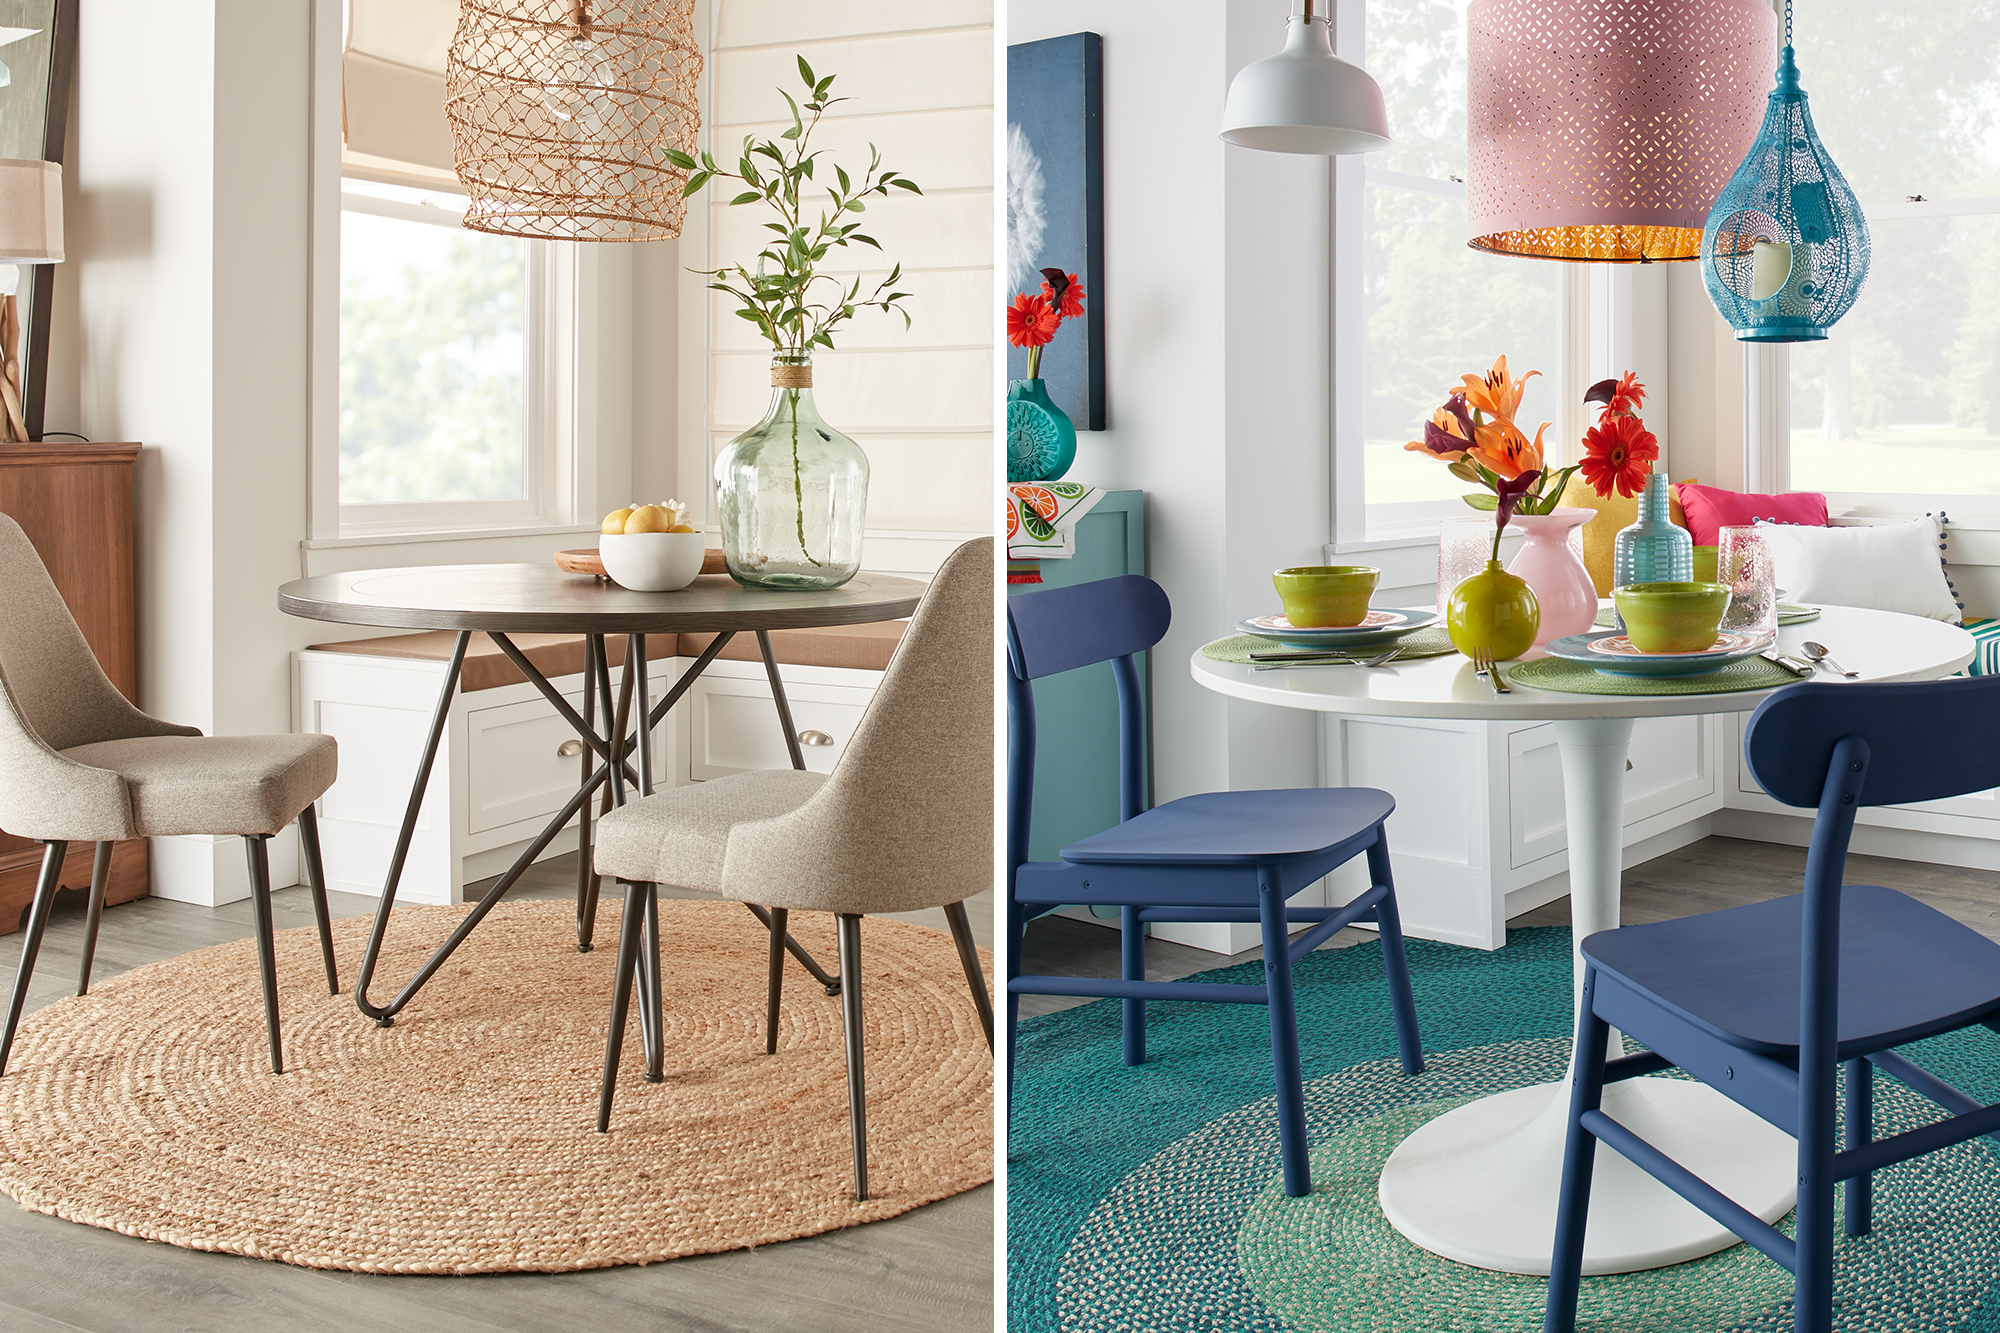 Neutral colored dining room area on the left with a bright and colorful dining room area on the right